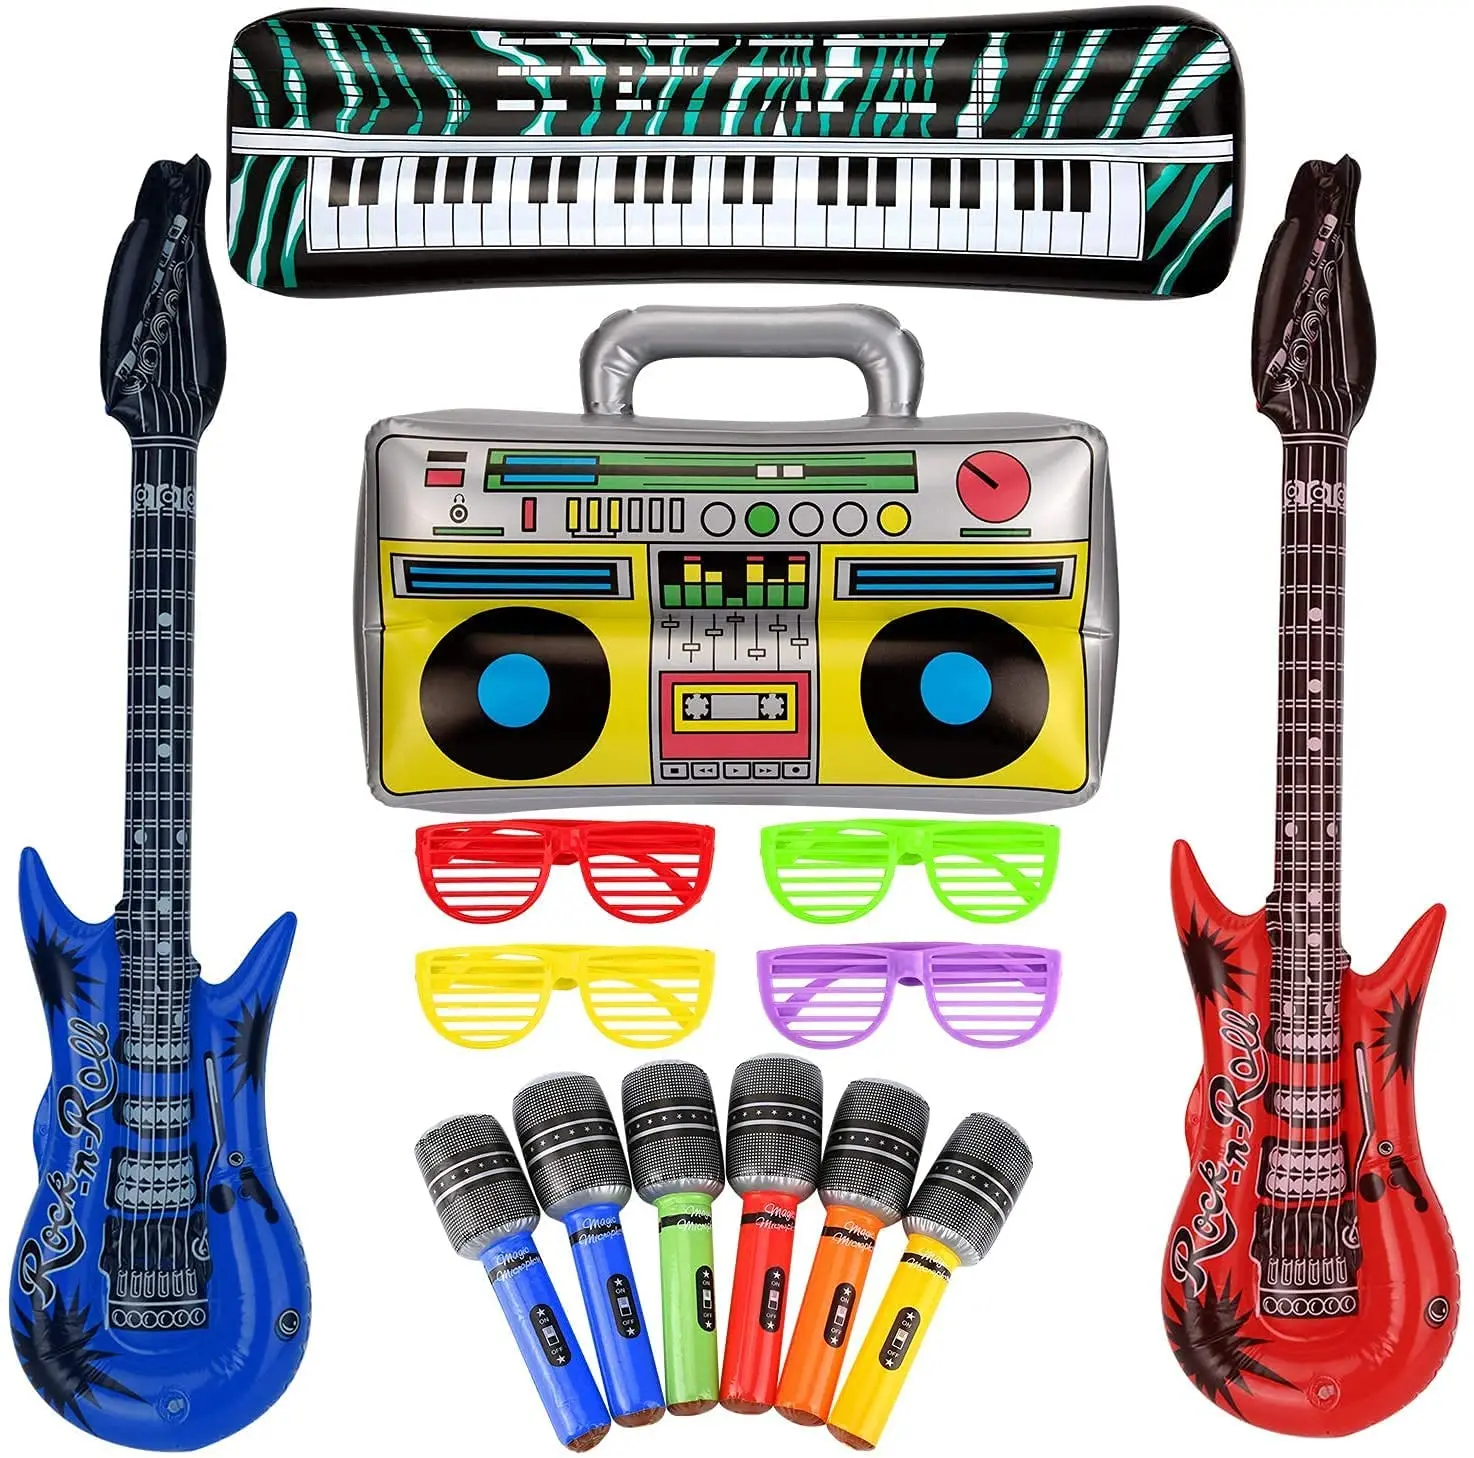 90s Party Decor Inflatable Rock Star ballon set Inflate Rock Musical Instrument Rock Pop Star Disco 80s 90s Retro Party Supplies